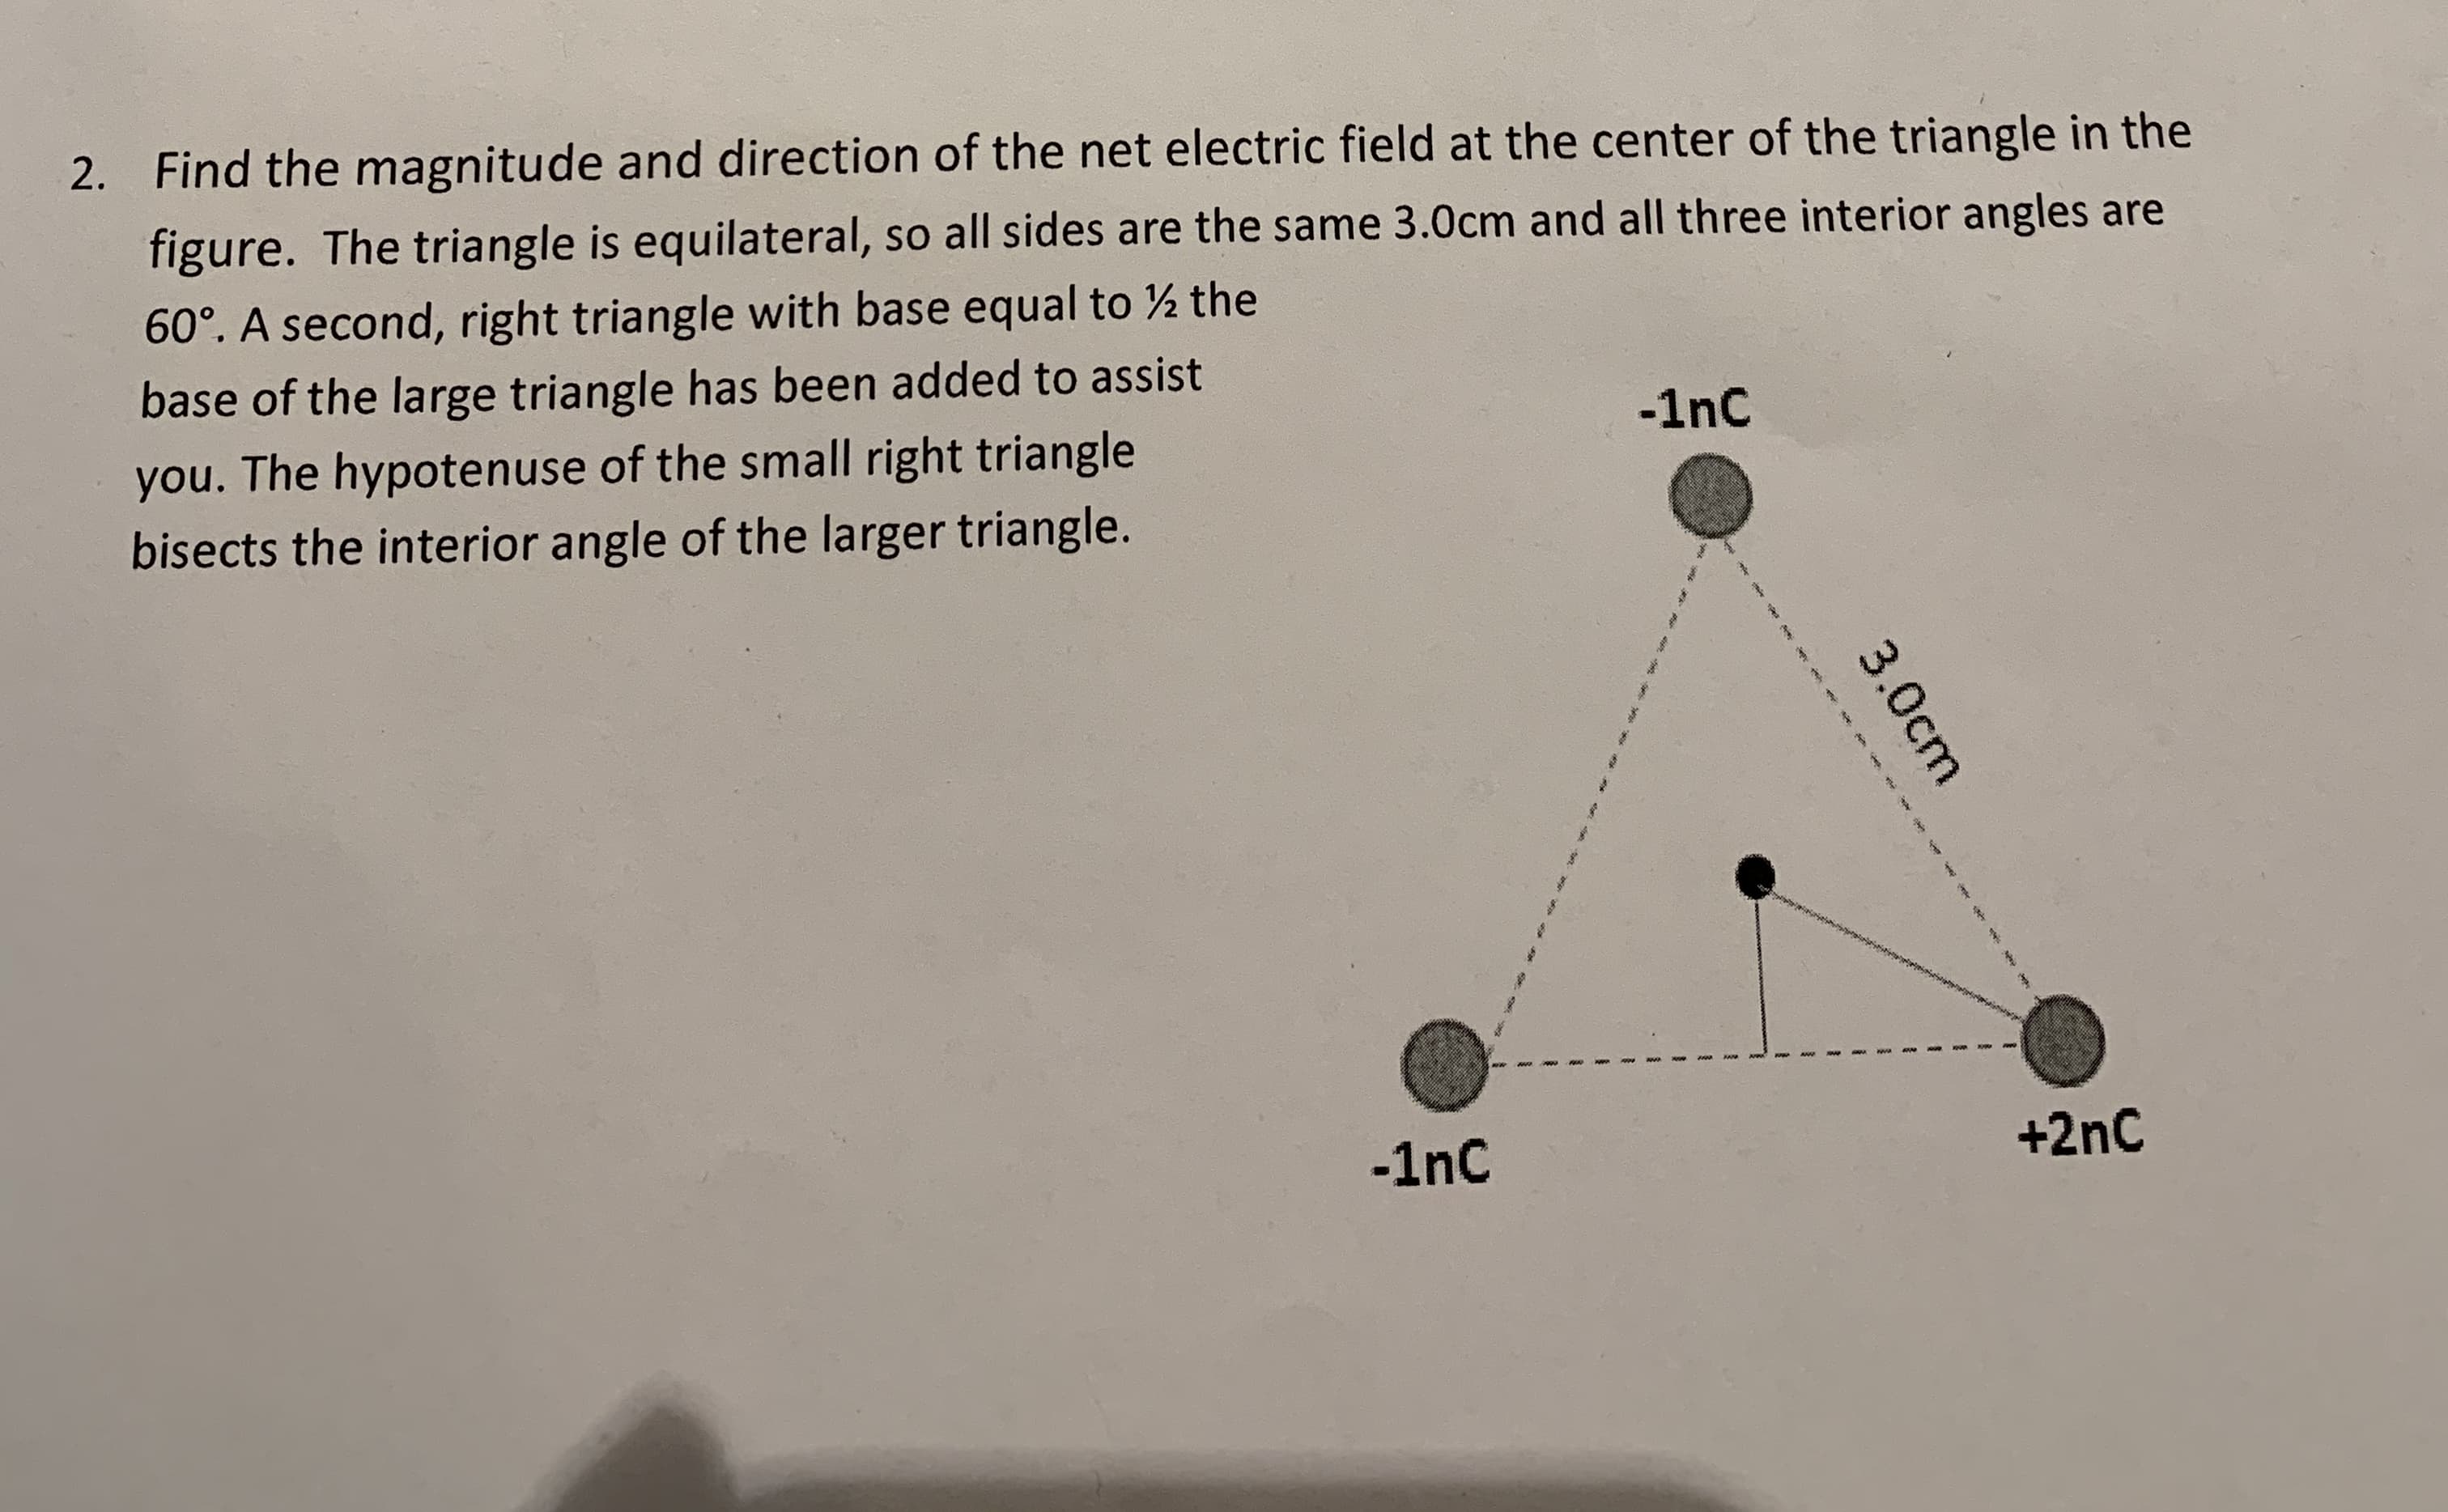 2. Find the magnitude and direction of the net electric field at the center of the triangle in the
figure. The triangle is equilateral, so all sides are the same 3.0cm and all three interior angles are
60°. A second, right triangle with base equal to ½ the
base of the large triangle has been added to assist
-1nC
you. The hypotenuse of the small right triangle
bisects the interior angle of the larger triangle.
-1nc
+2nC
3.0cm
ক শ প শদ আা
